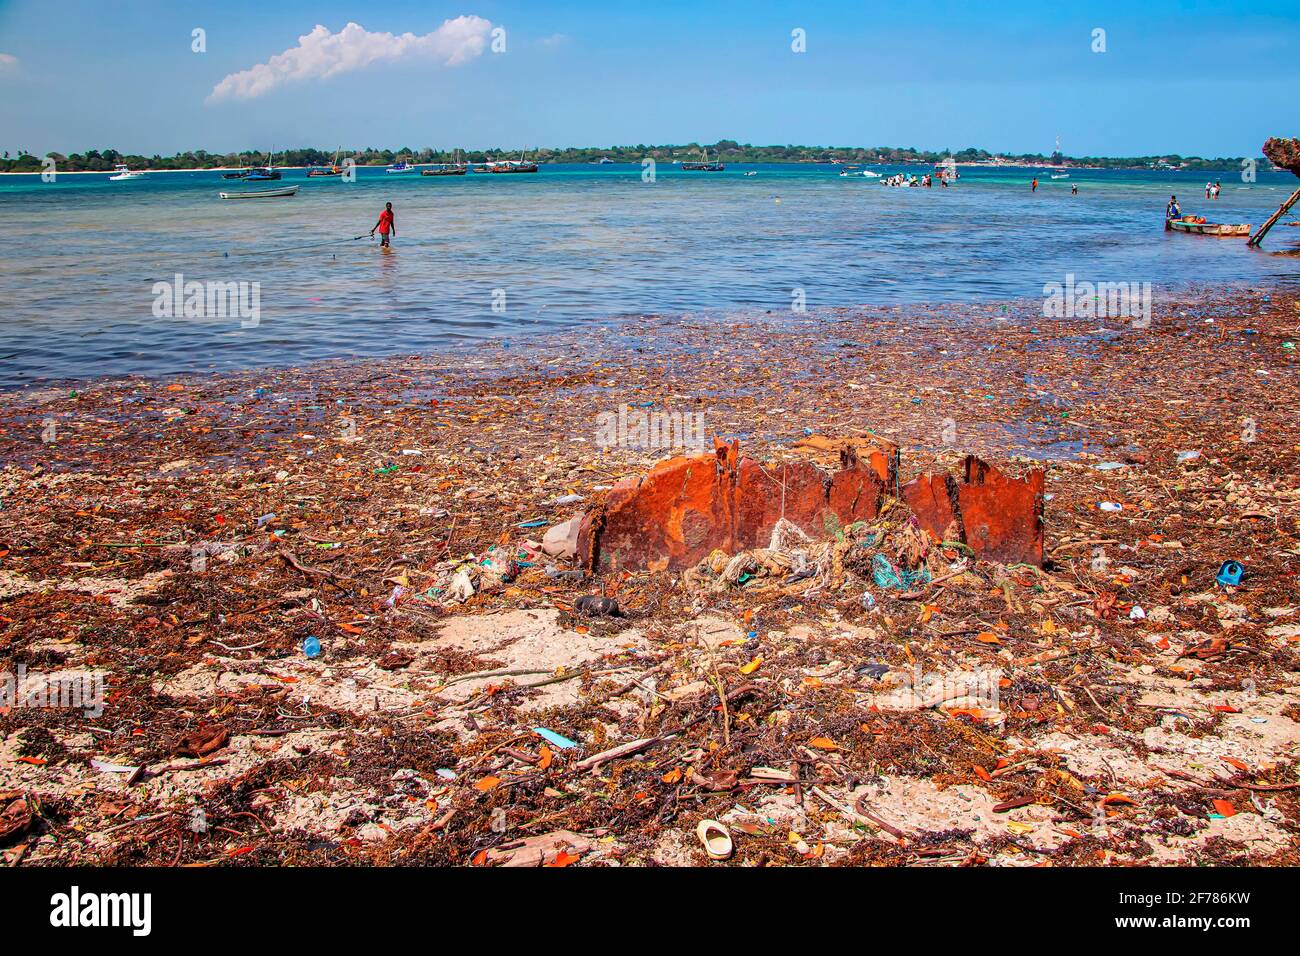 Wasini island, Kenya, AFRICA - February 26, 2020: A man stands in the garbage at sea. They are plastics in the Indian Ocean. The brothel spoils the Stock Photo